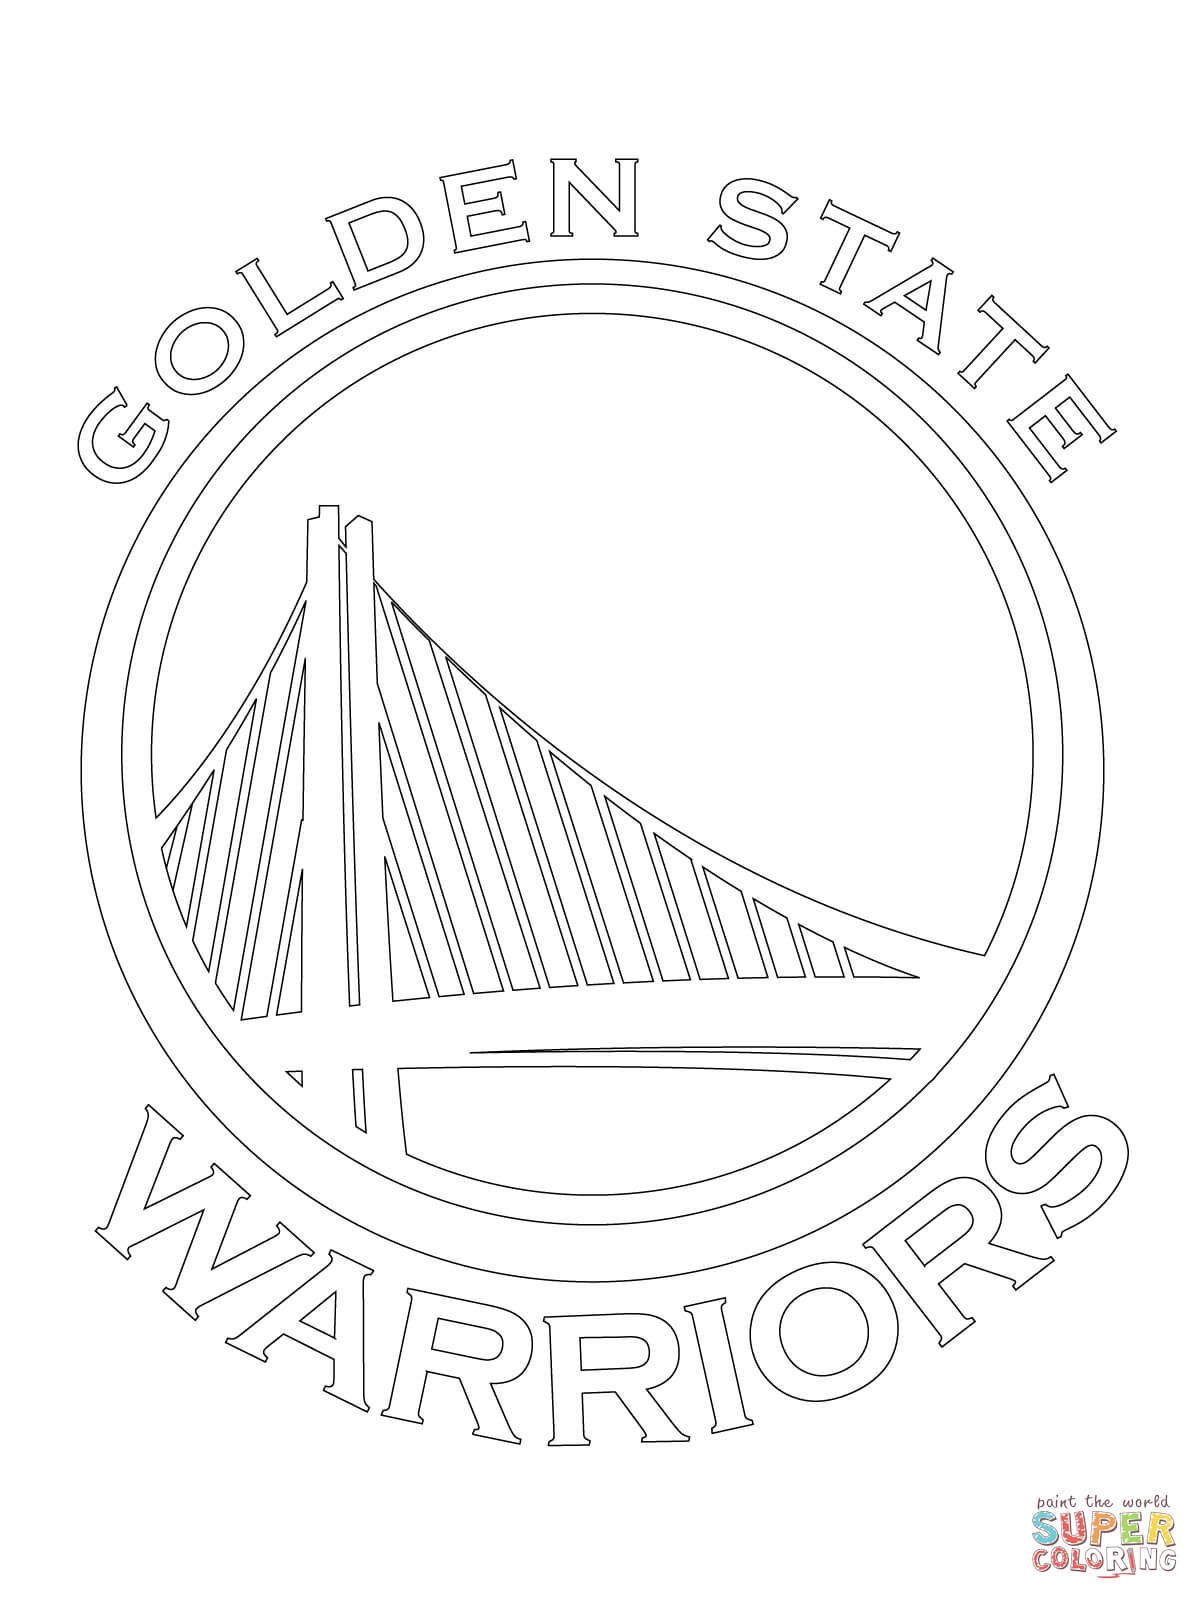 Lakers Logo Coloring Pages at GetColorings.com | Free printable colorings pages to ...1200 x 1600